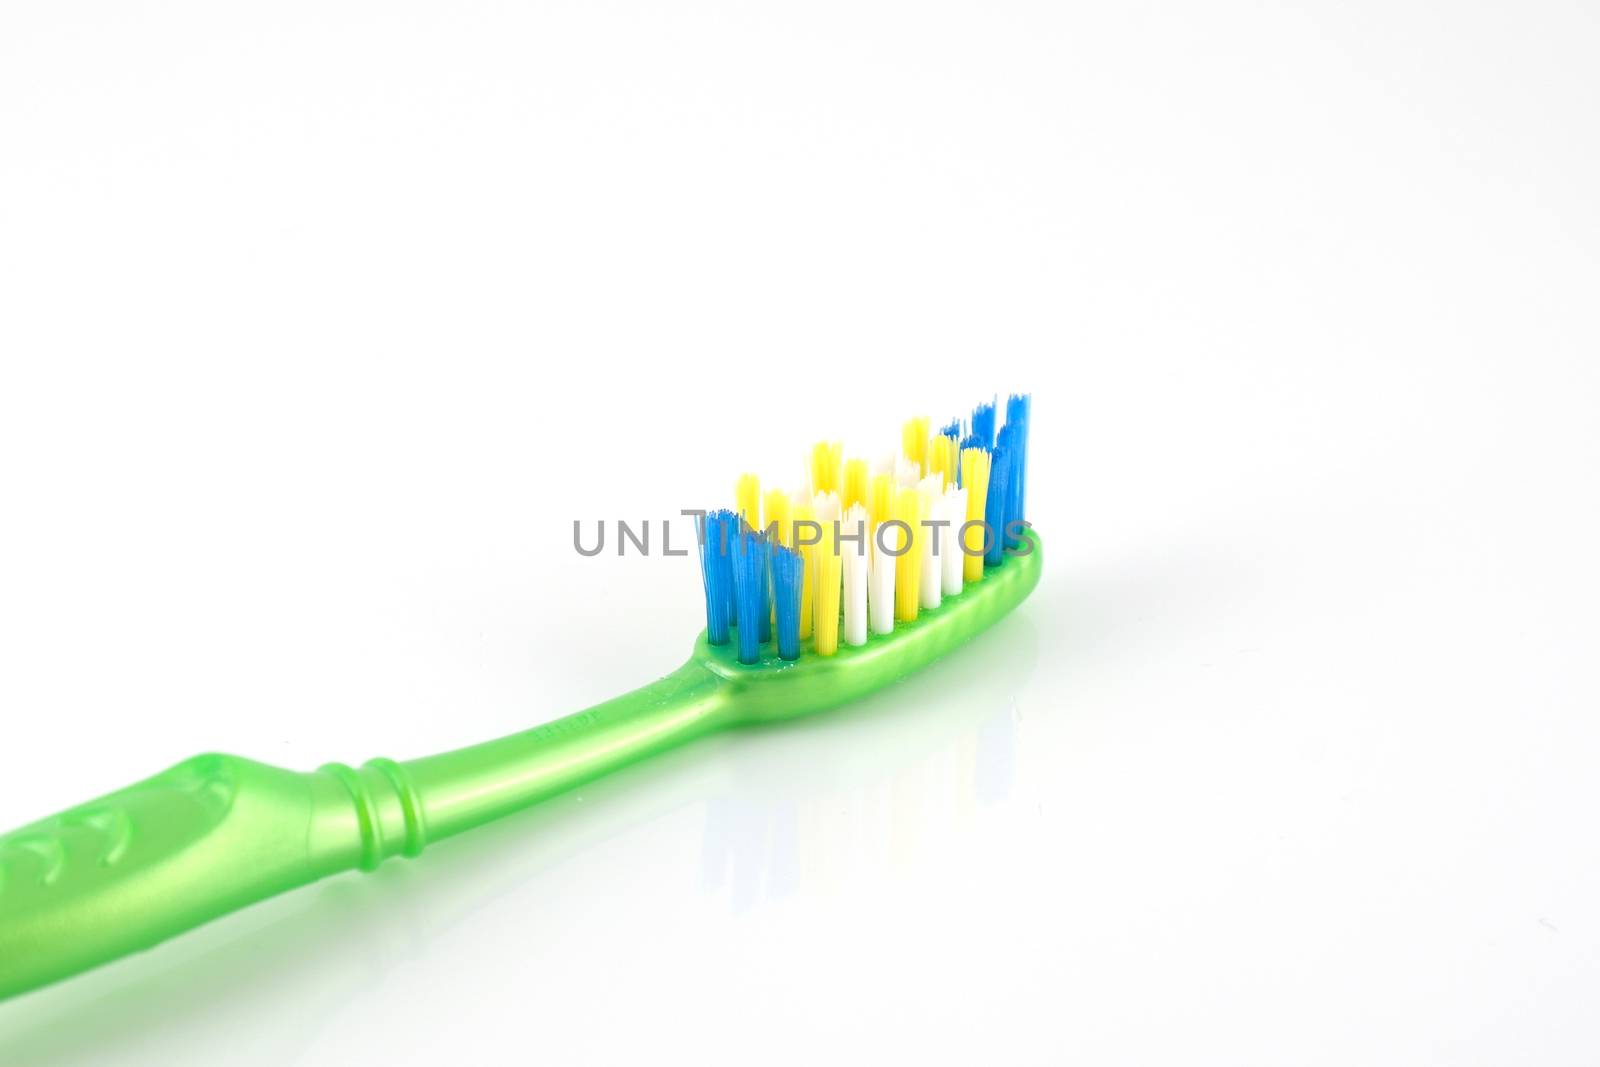 Tooth-brush with green handle over white by sergpet